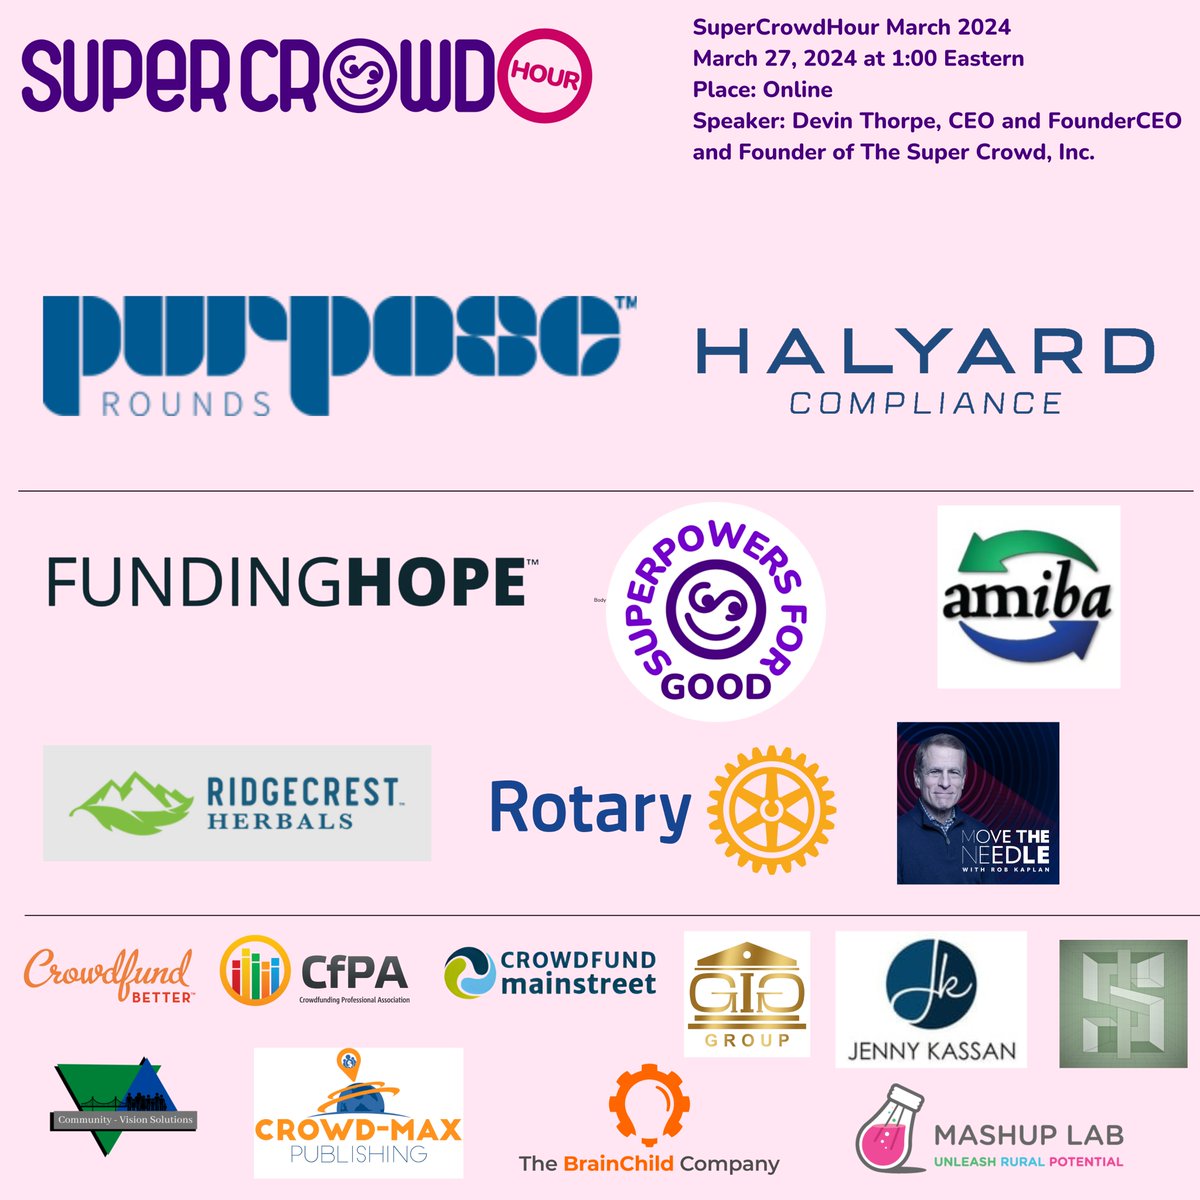 We're overflowing with gratitude for our incredible Impact Sponsors, Supporting Co-hosts, and Co-hosts who've made #SuperCrowdHour March 2024 possible! 🙏 Your unwavering support and dedication to driving positive change through impact investing are truly inspiring.